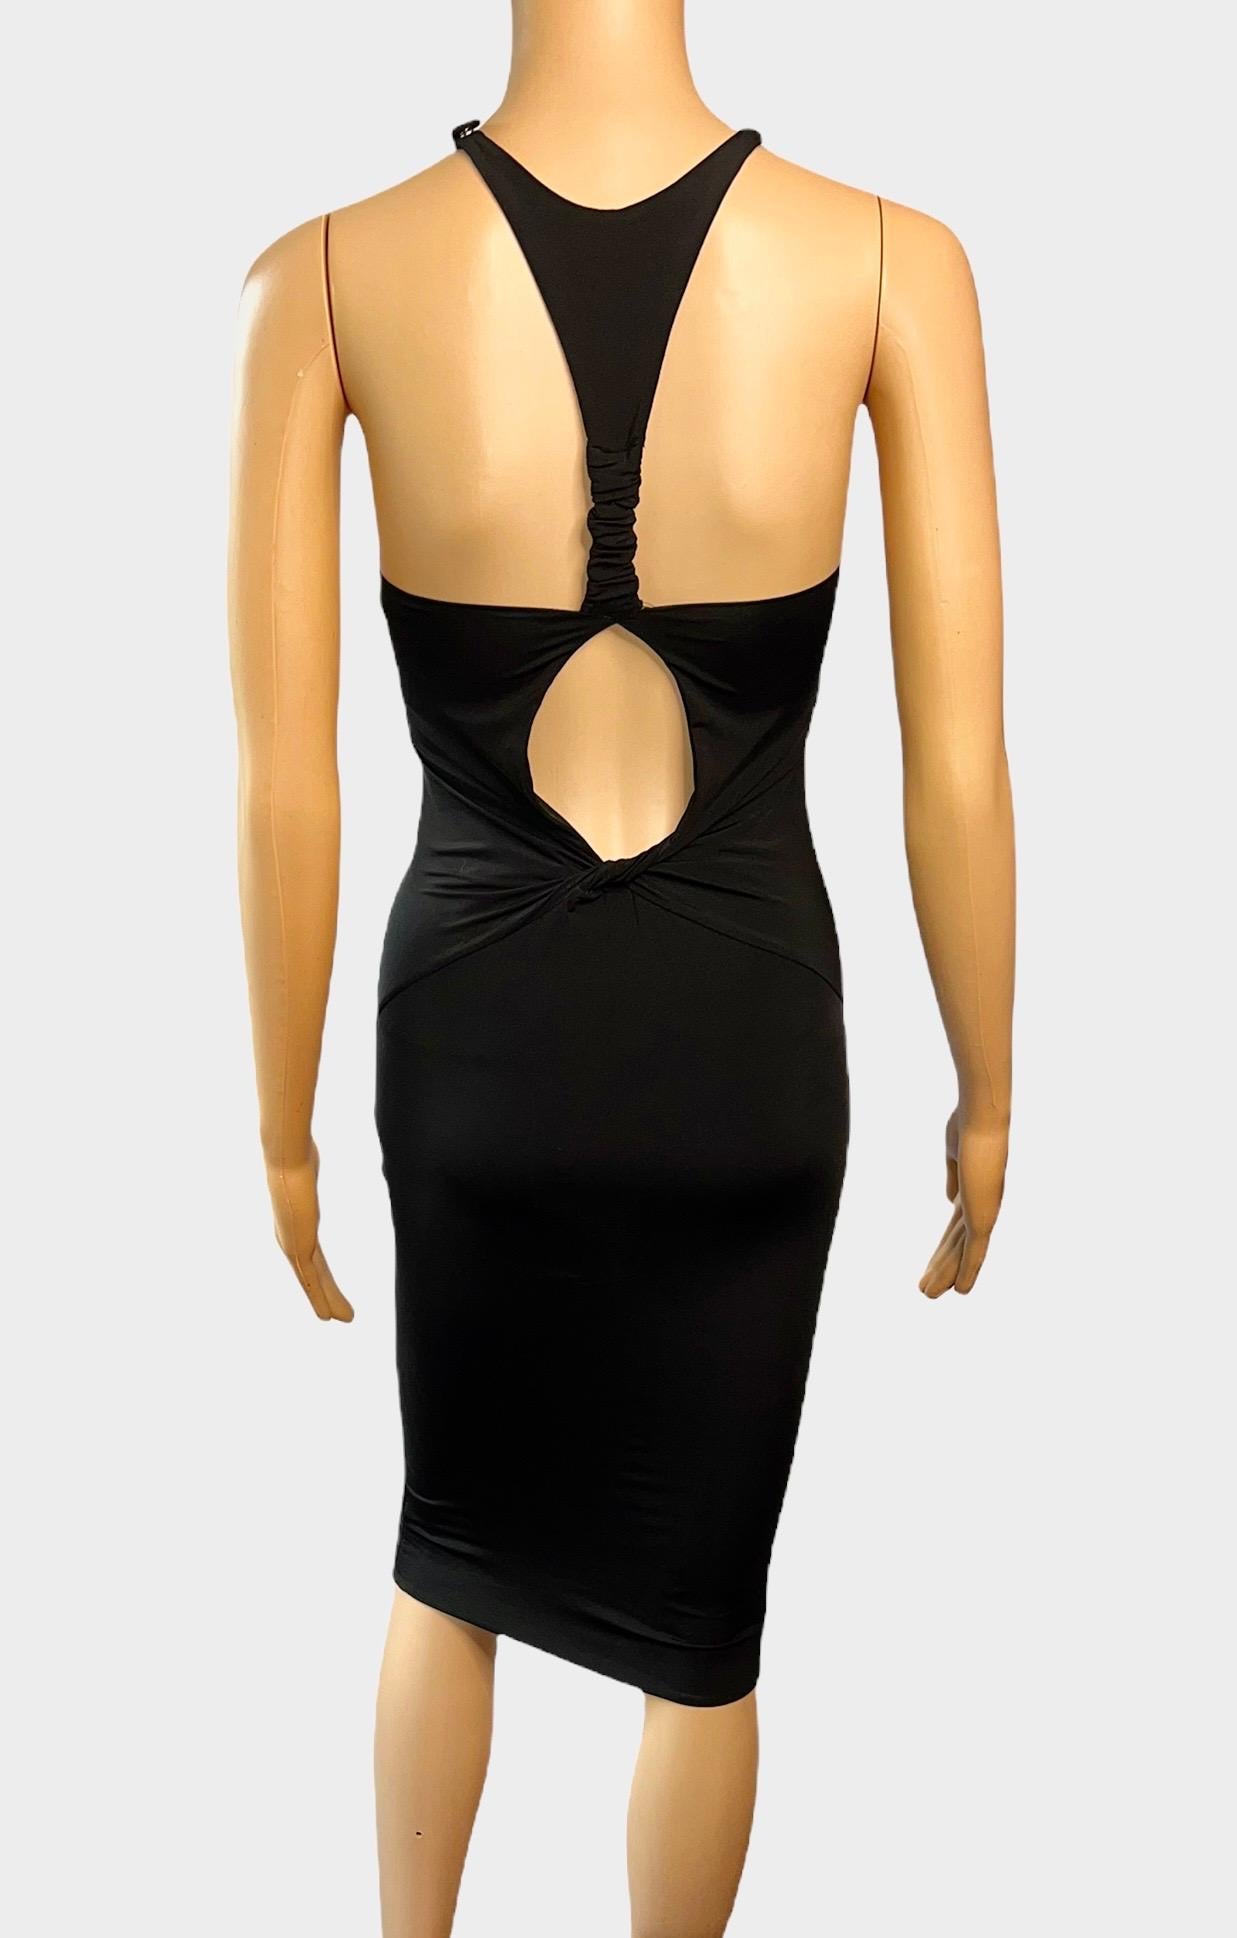 Tom Ford for Gucci F/W 2004 Plunging Cutout Black Evening Dress  For Sale 3